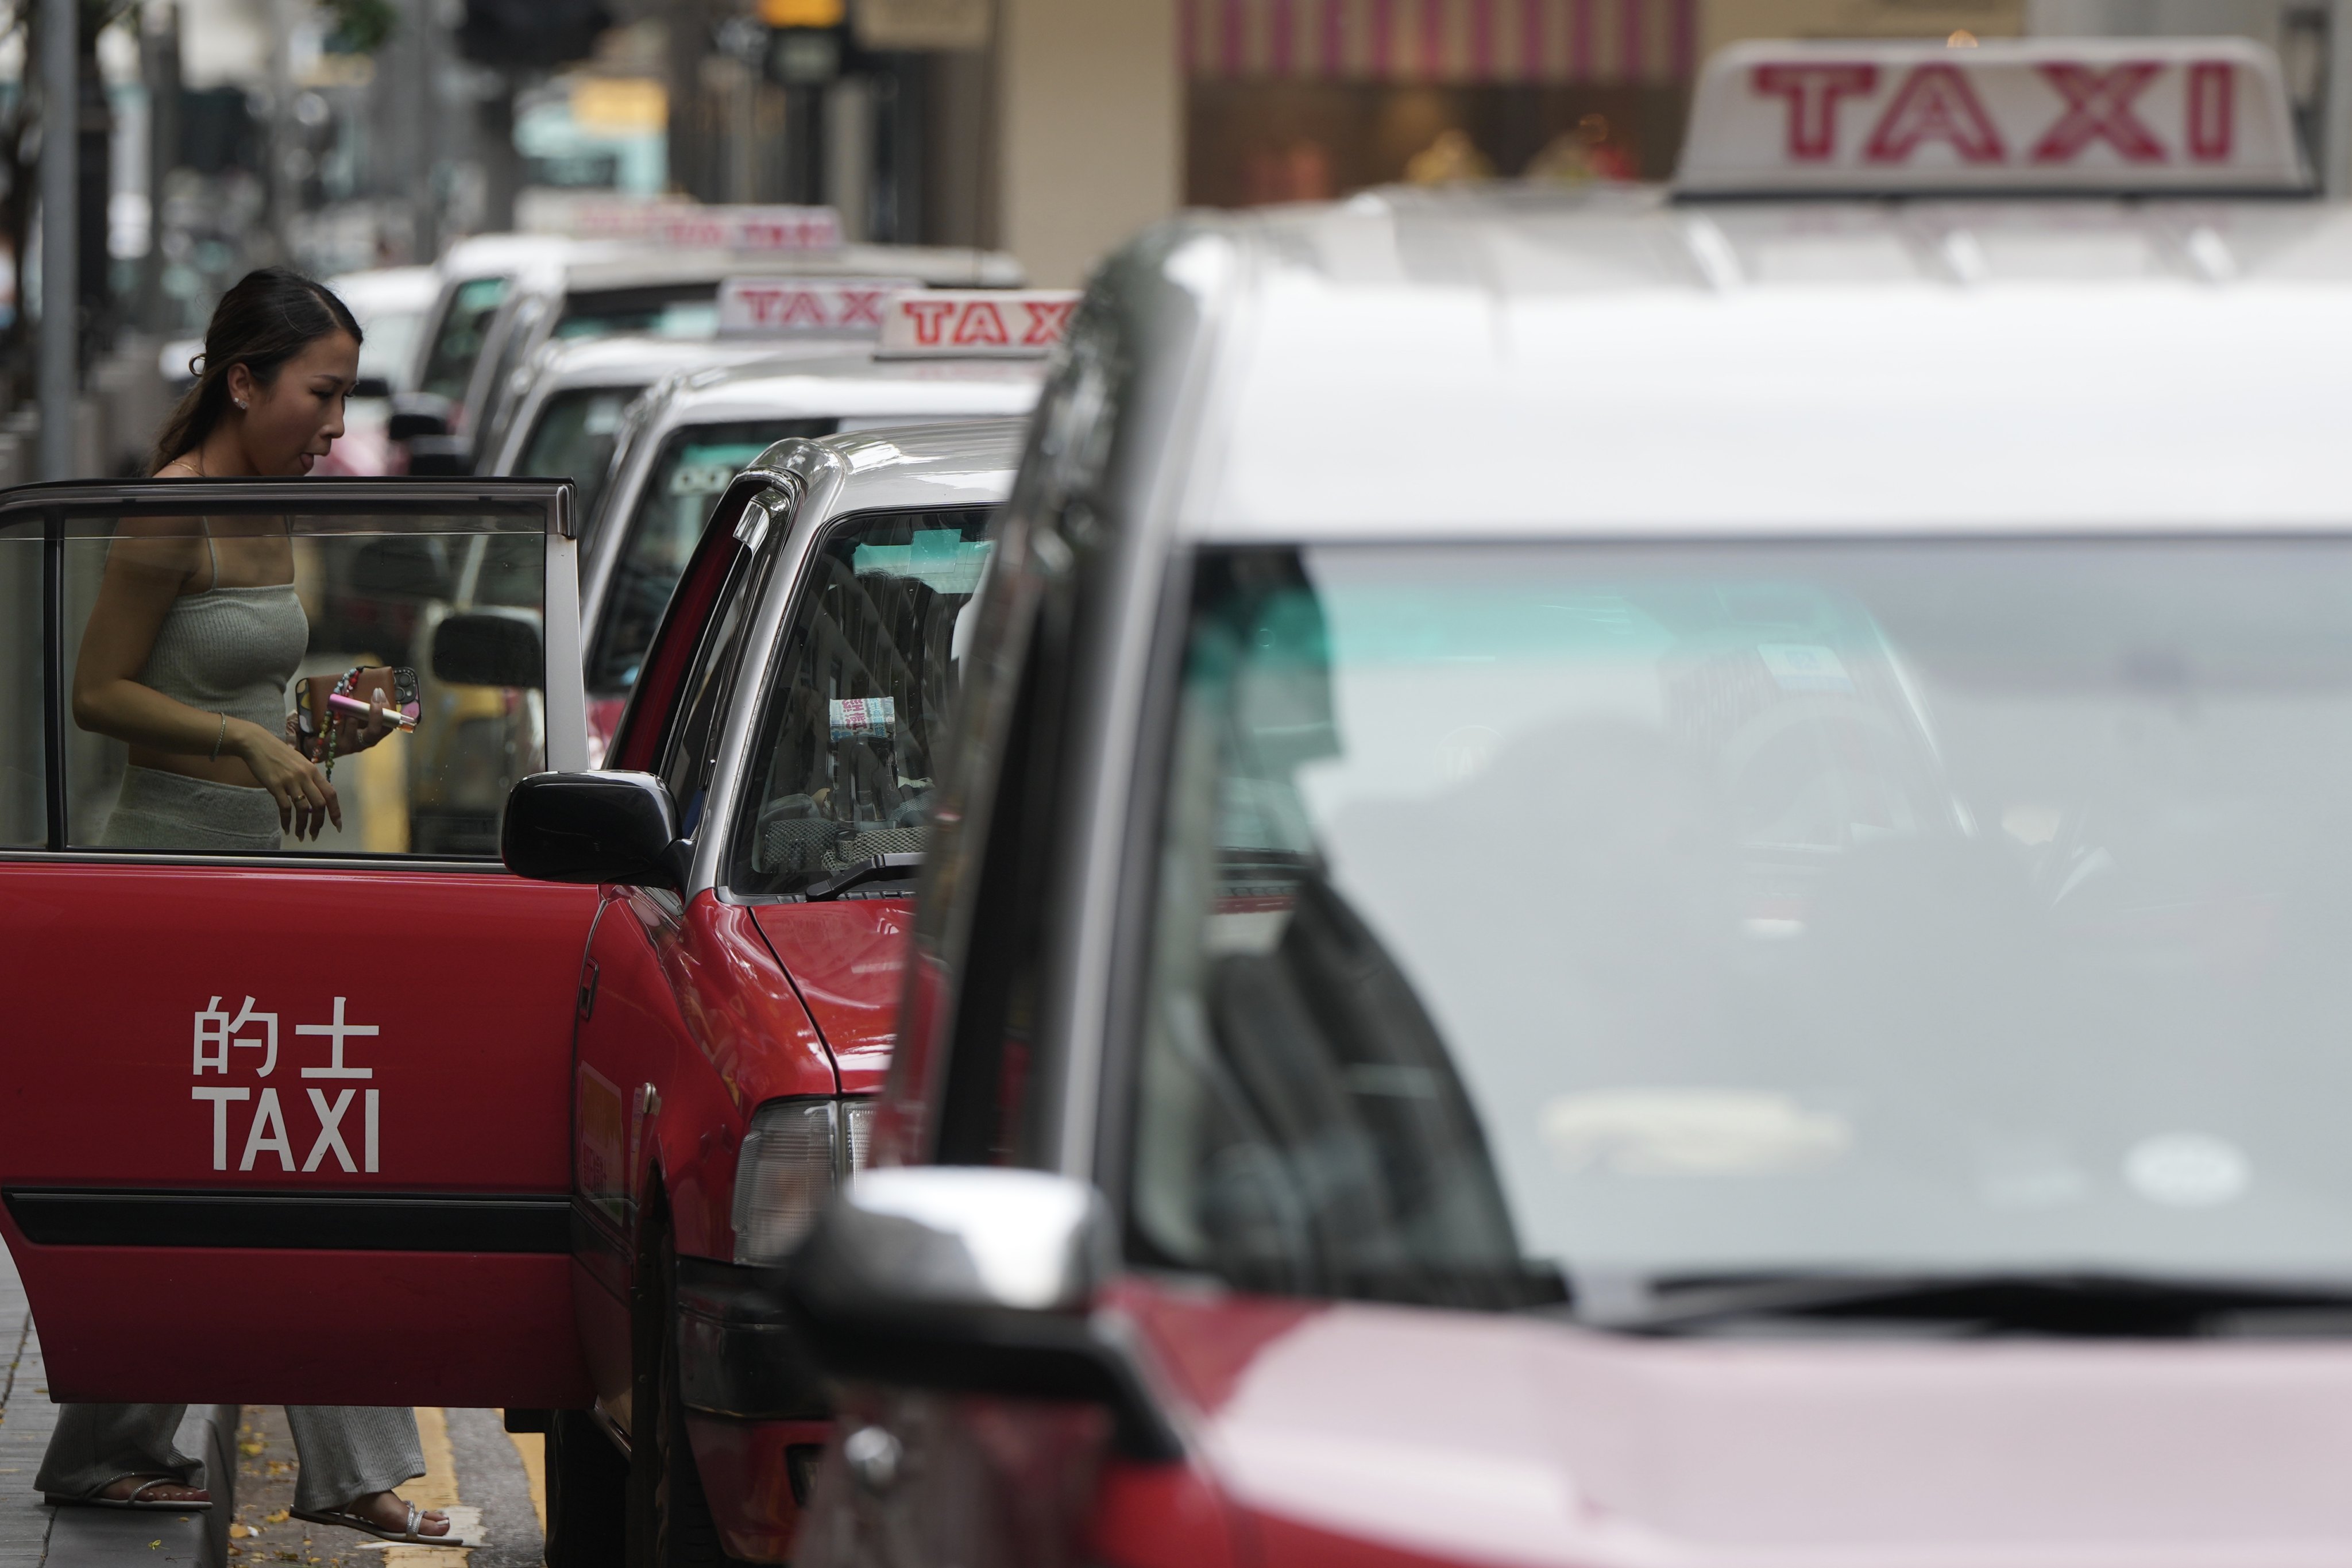 Hong Kong’s government is seeking to crack down on bad behaviour by the city’s taxi drivers. Photo: Sam Tsang